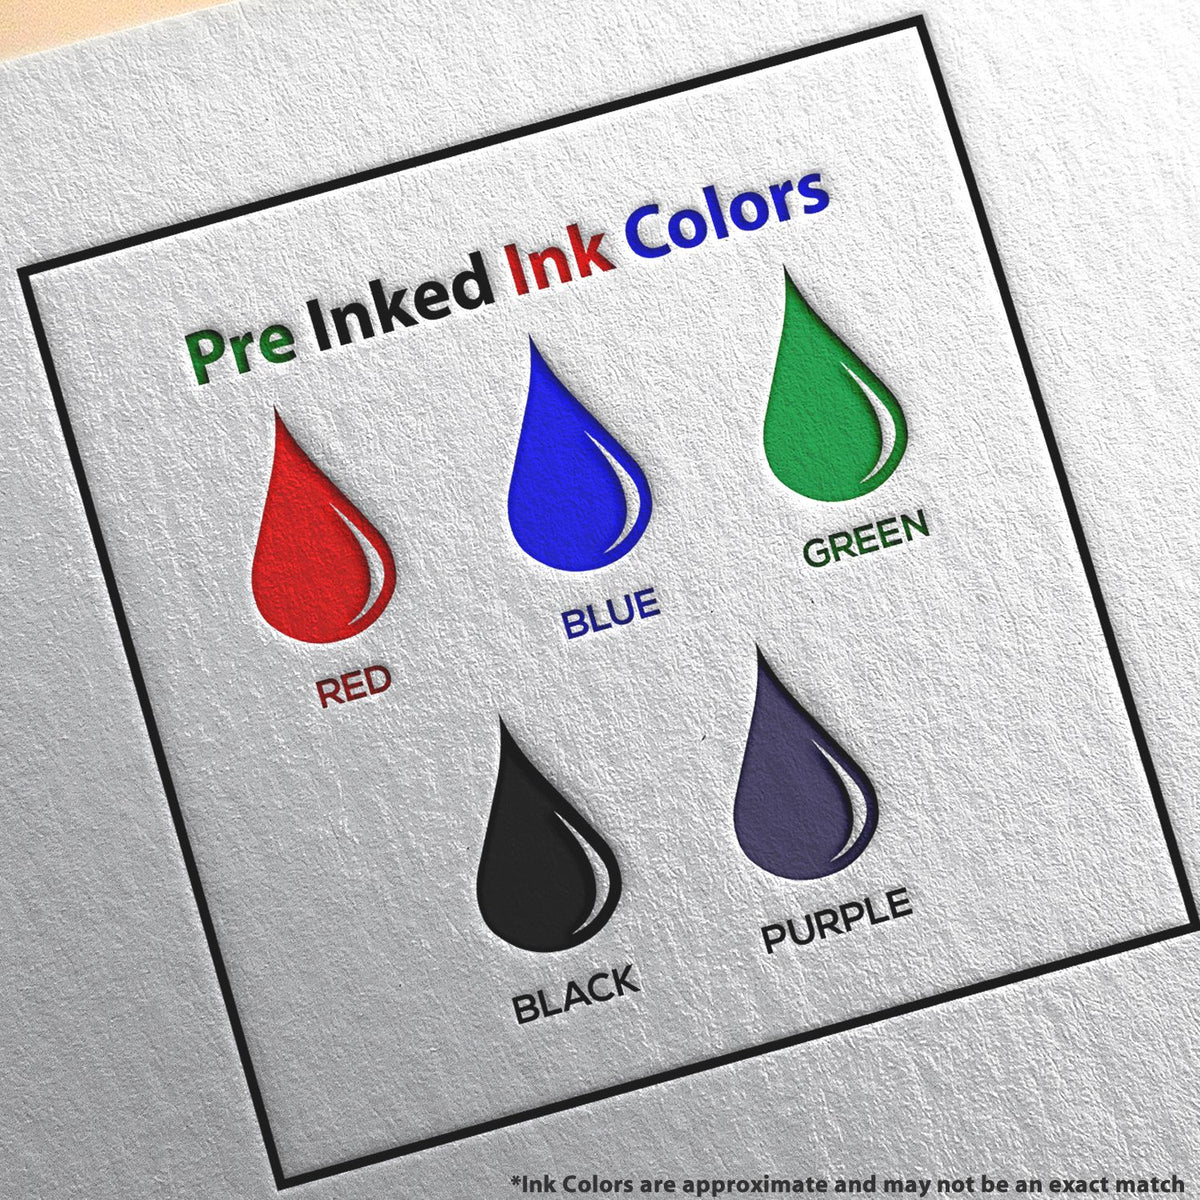 A picture showing the different ink colors or hues available for the Premium MaxLight Pre-Inked Texas Landscape Architectural Stamp product.